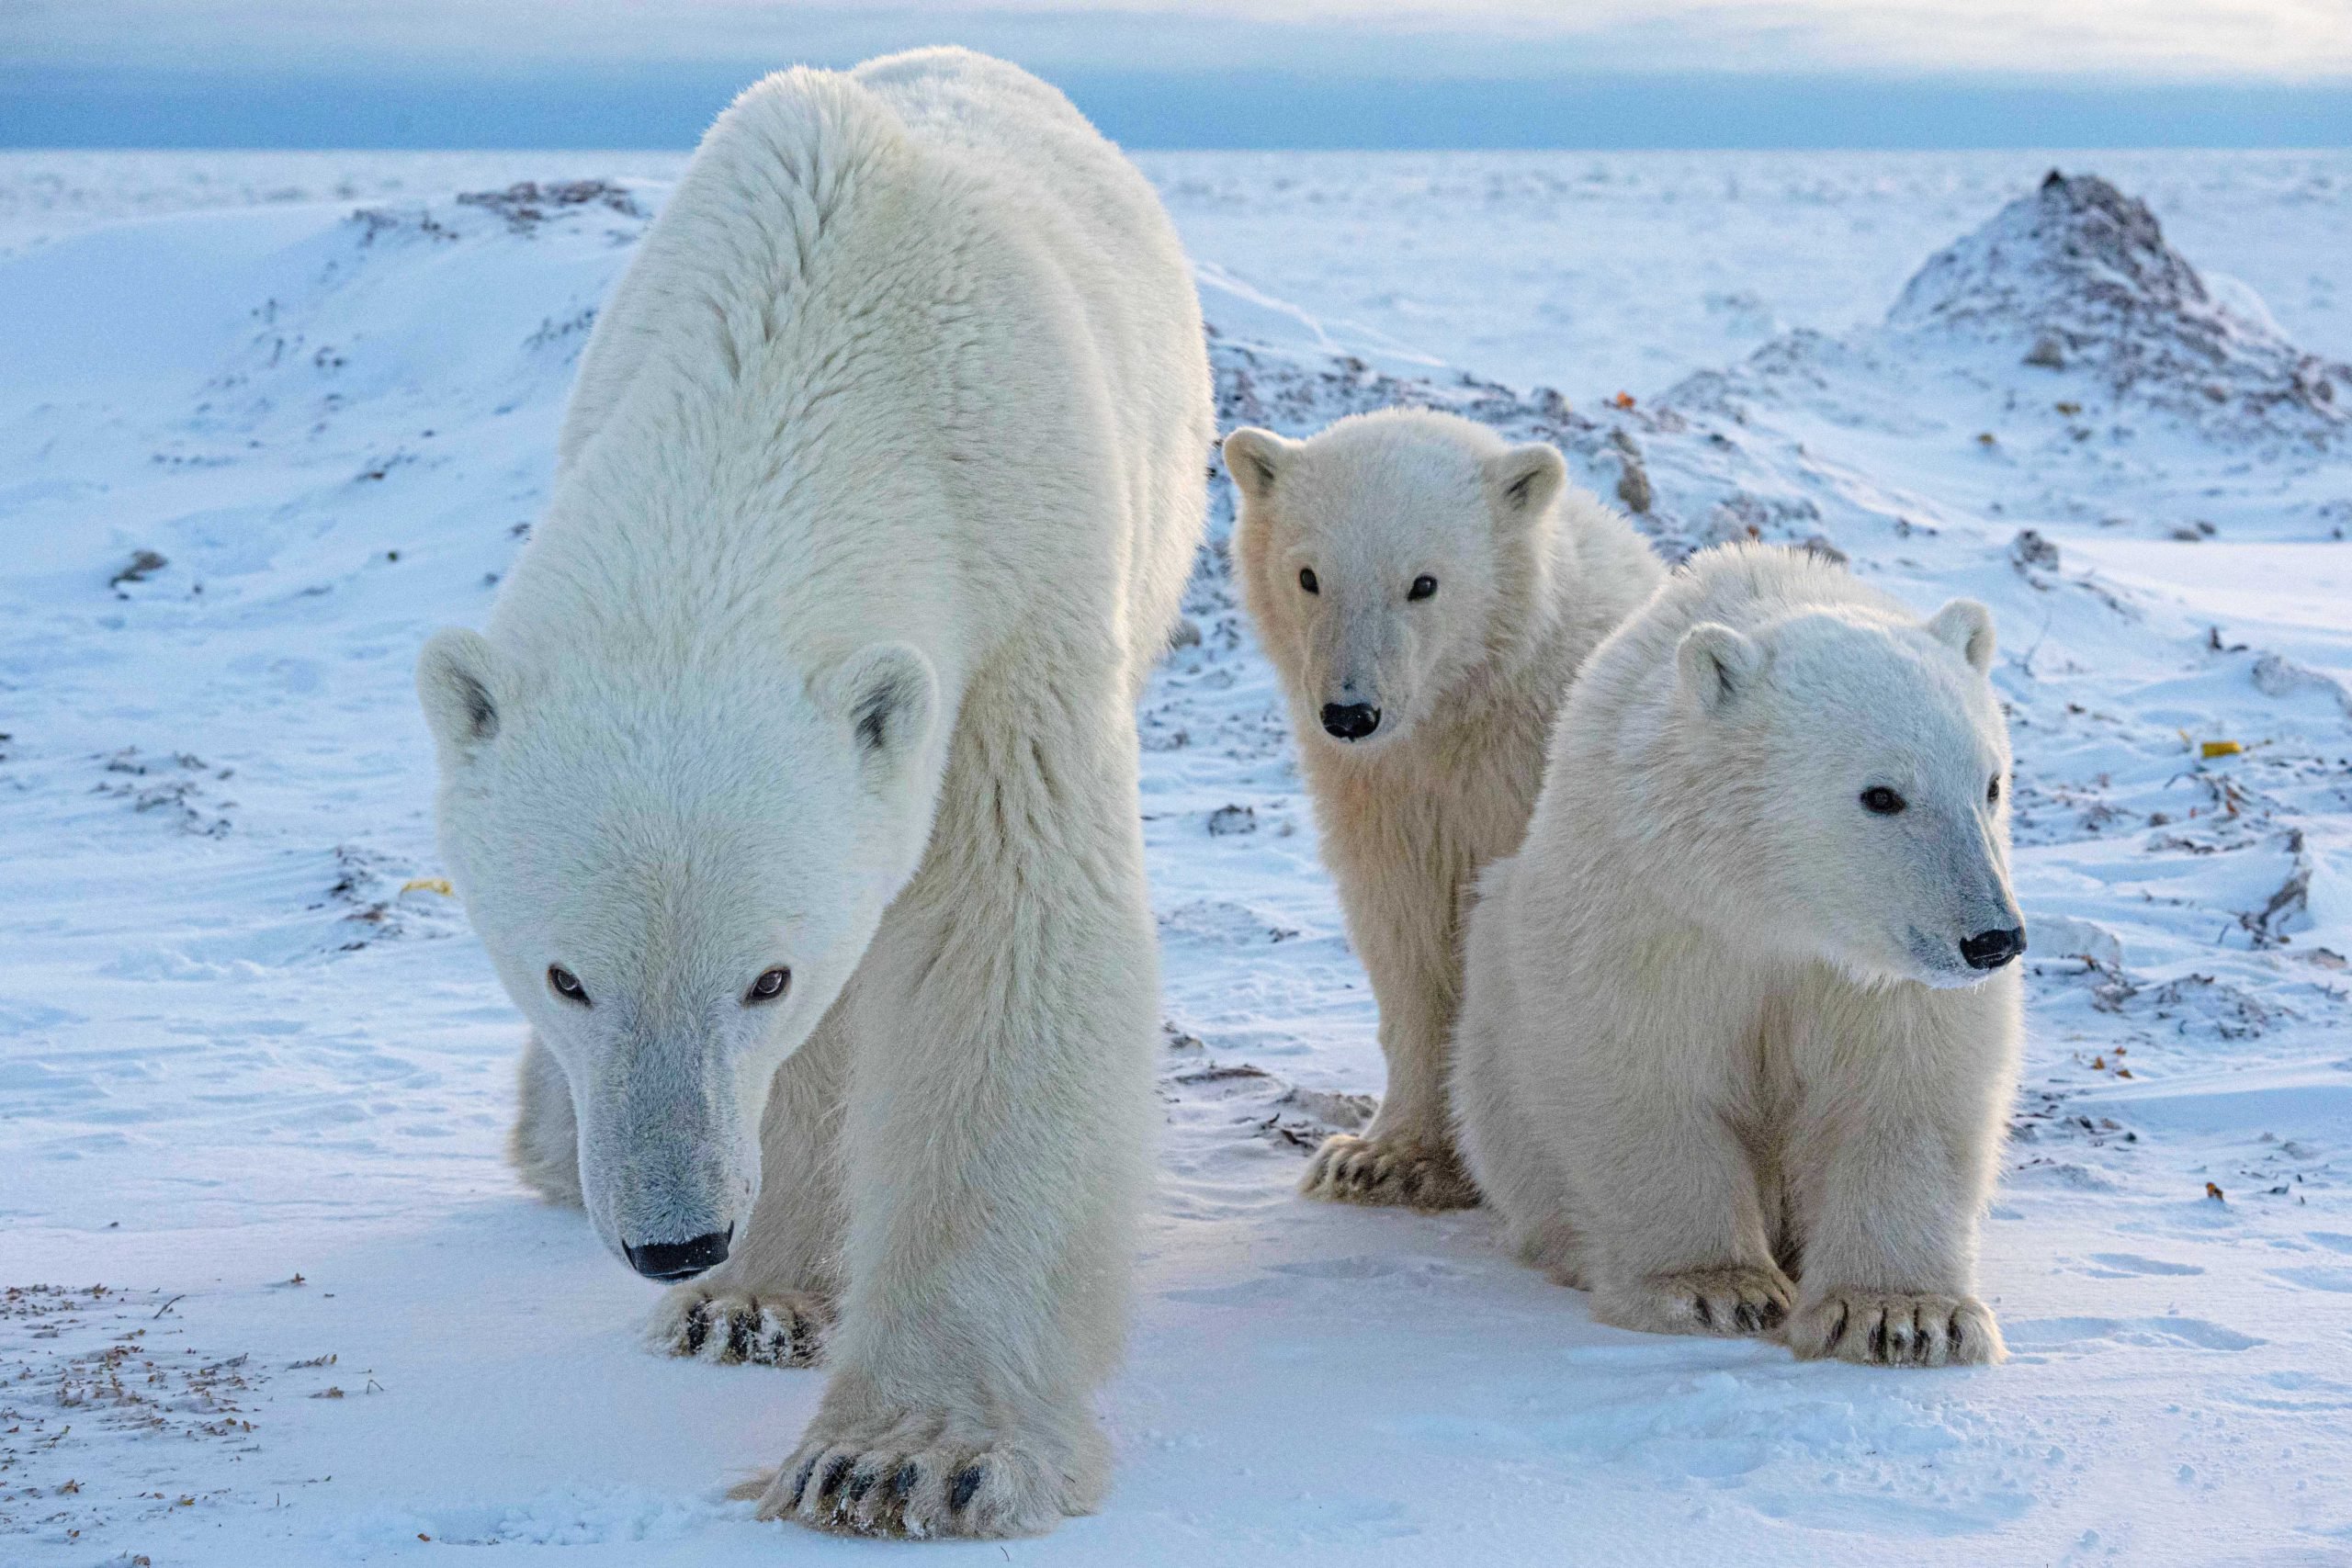 5-Polar-Bear-Fly-In-Migration-Best-Mother-Polar-Bear-and-Cubs-at-dusk-Private-Journey-Arctic-Polar-Adventure-Arctic-Kingdom-scaled